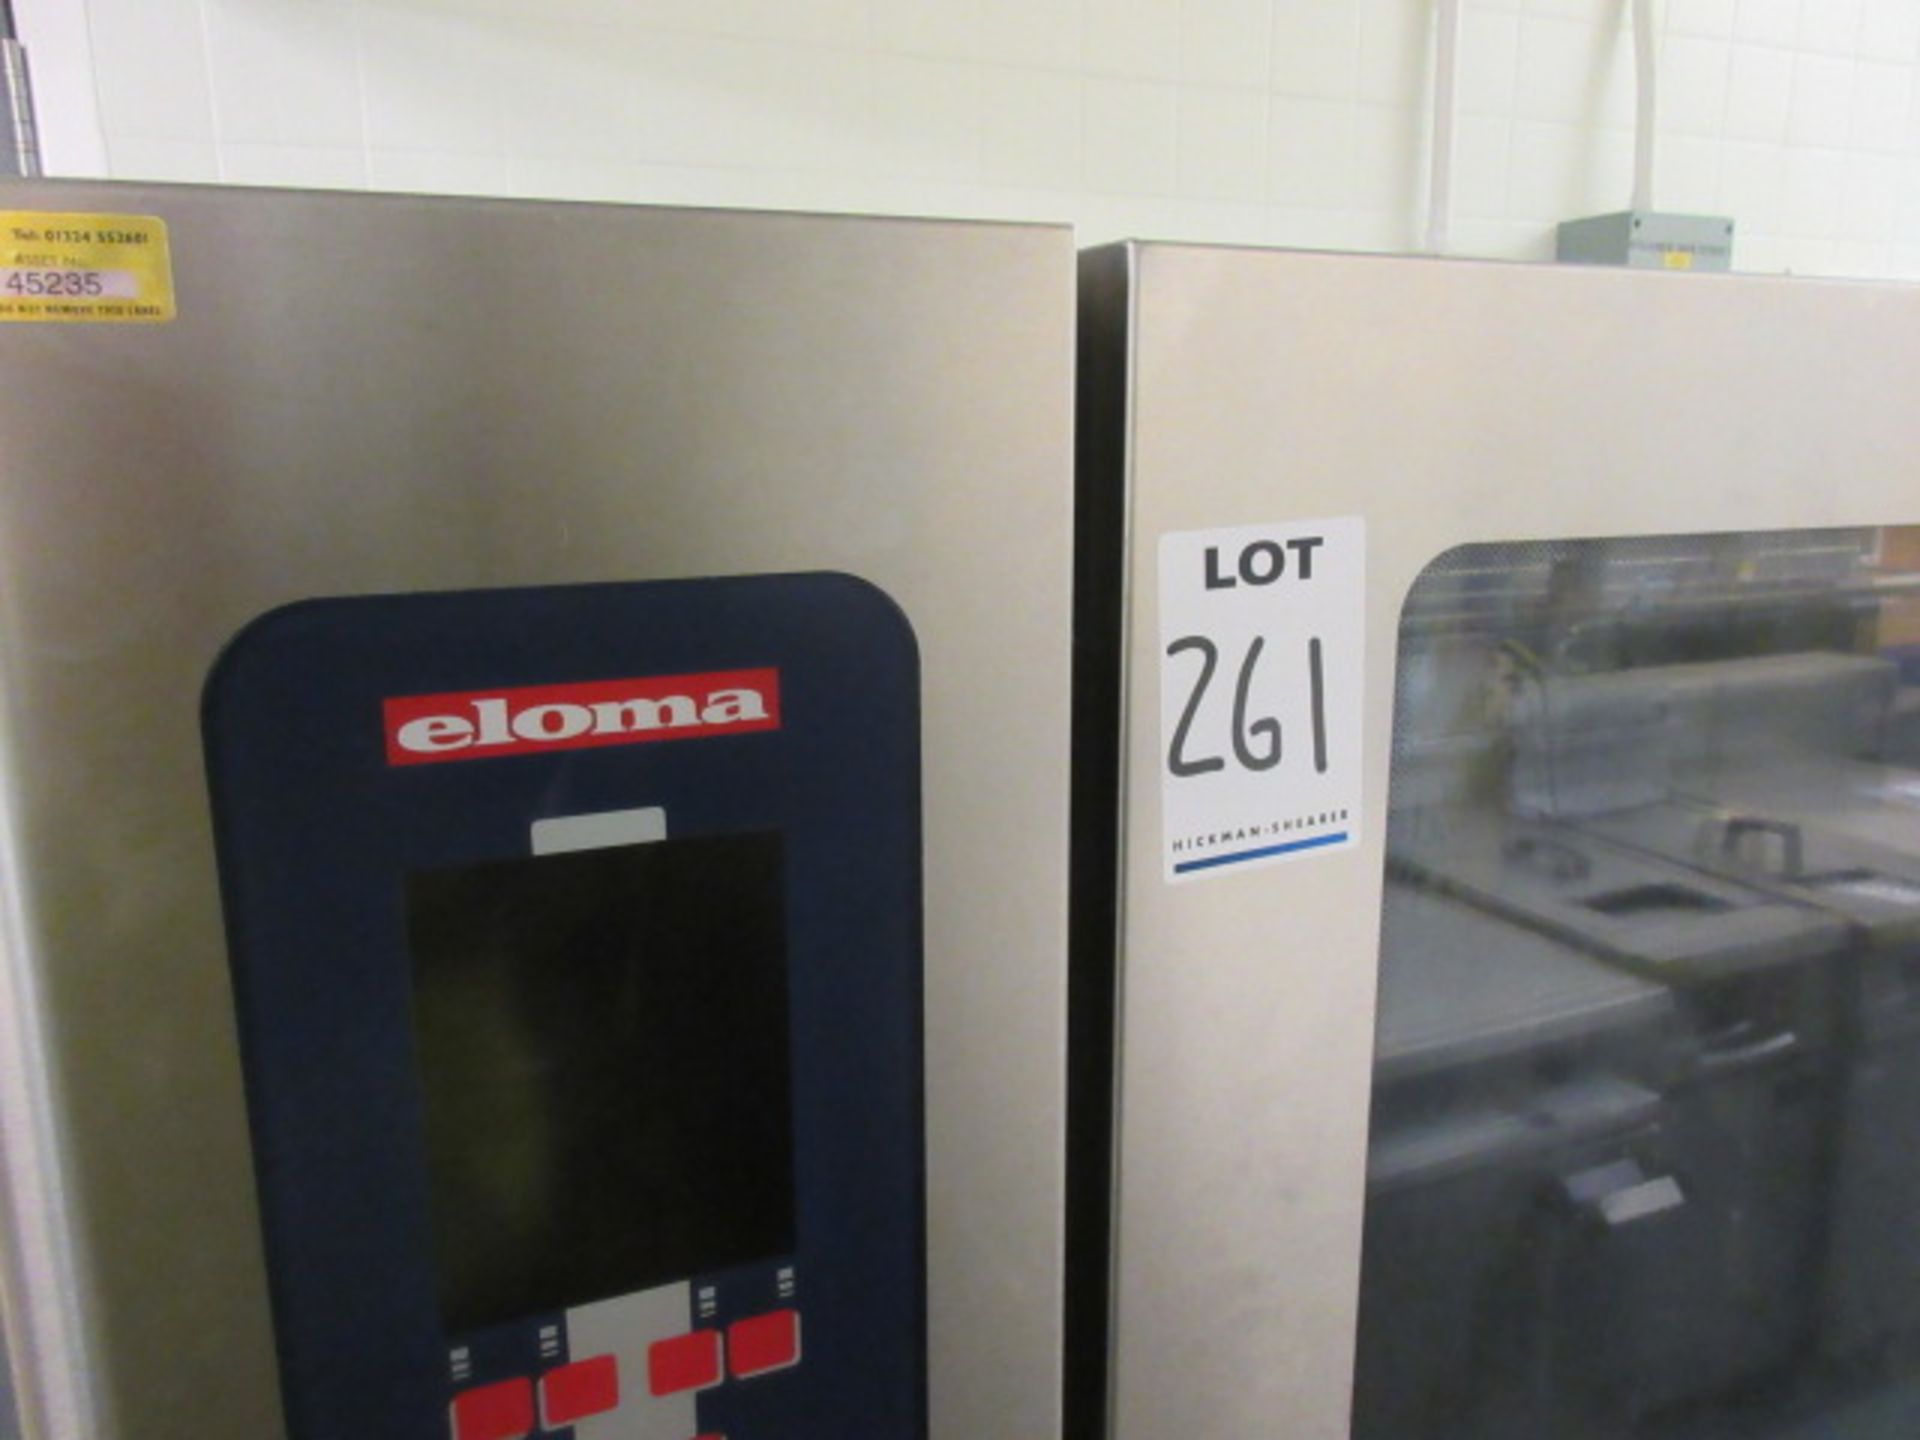 ELOMA GENIUS T 10-11 17 KW ELECTRIC STEAM OVEN ON MOBILE BASE (2010) - Image 5 of 5